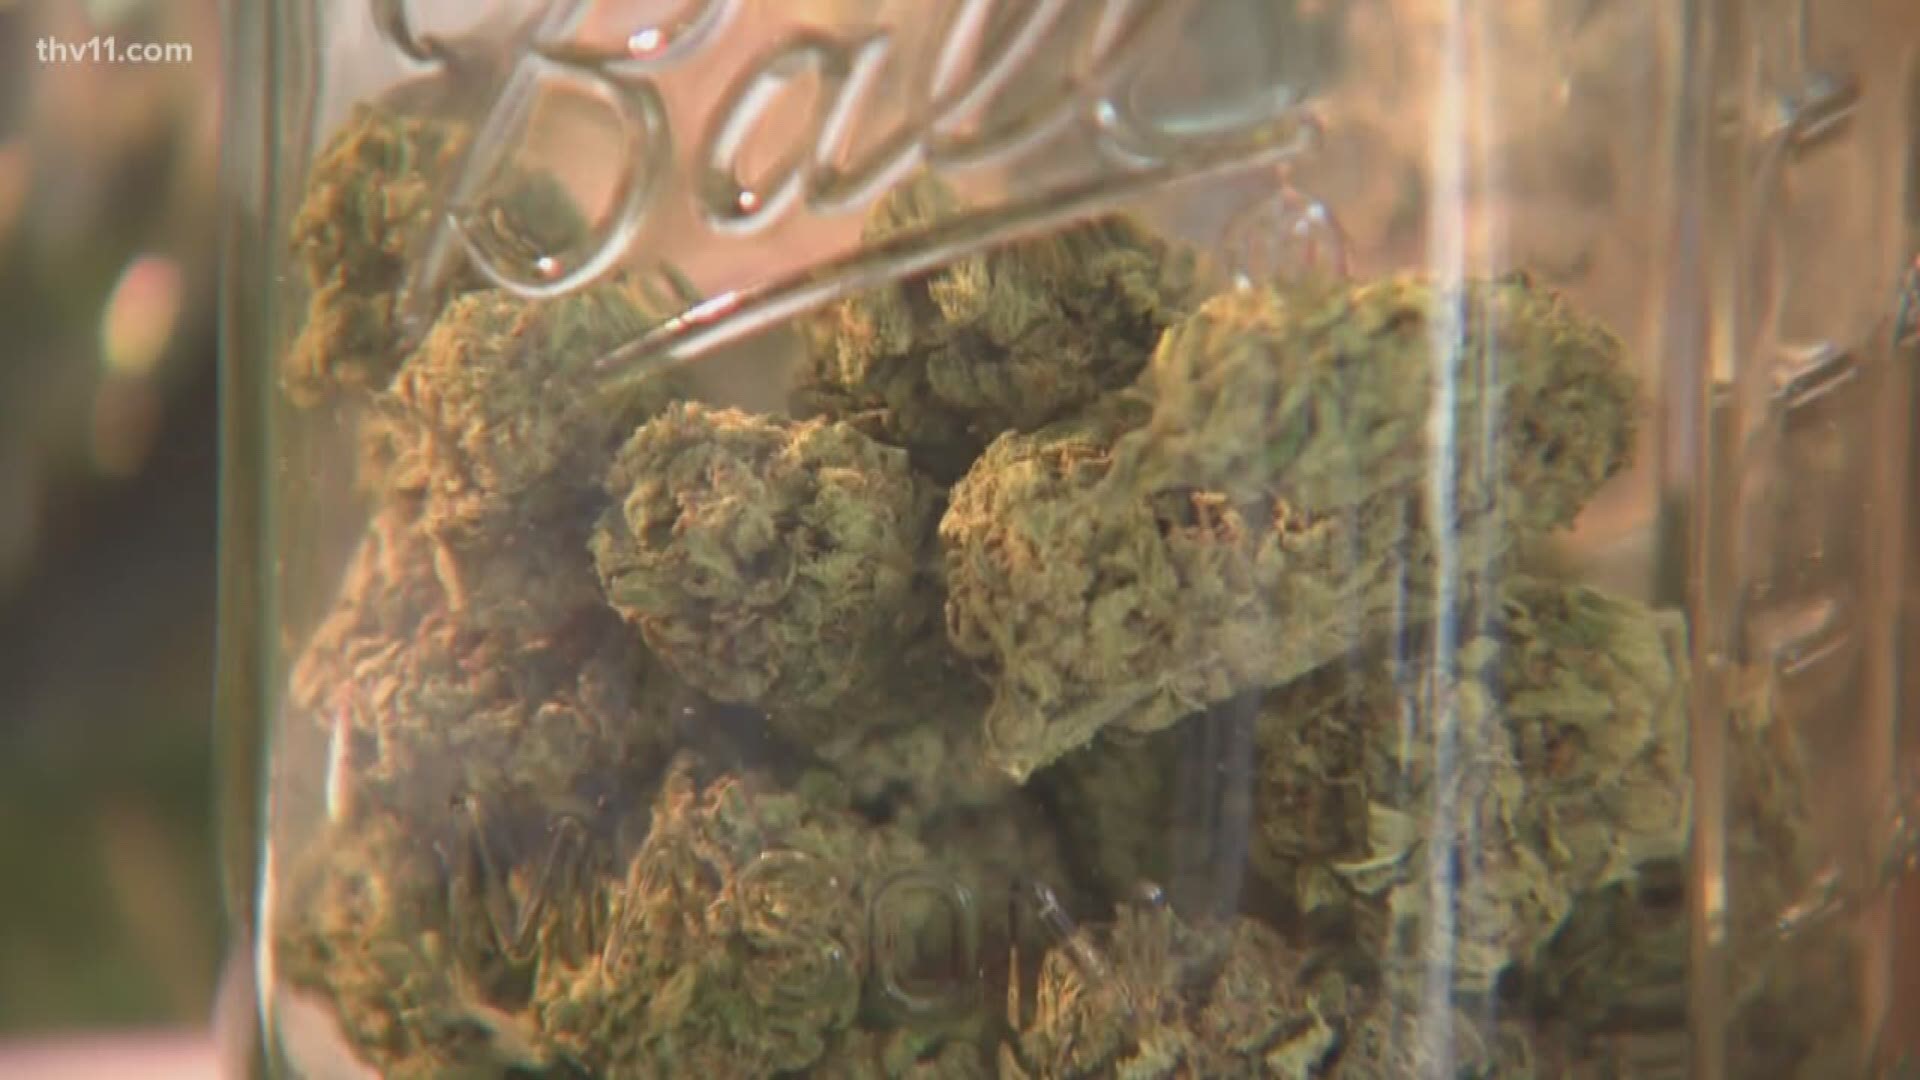 In just a matter of weeks, medical marijuana will likely become available in Arkansas.